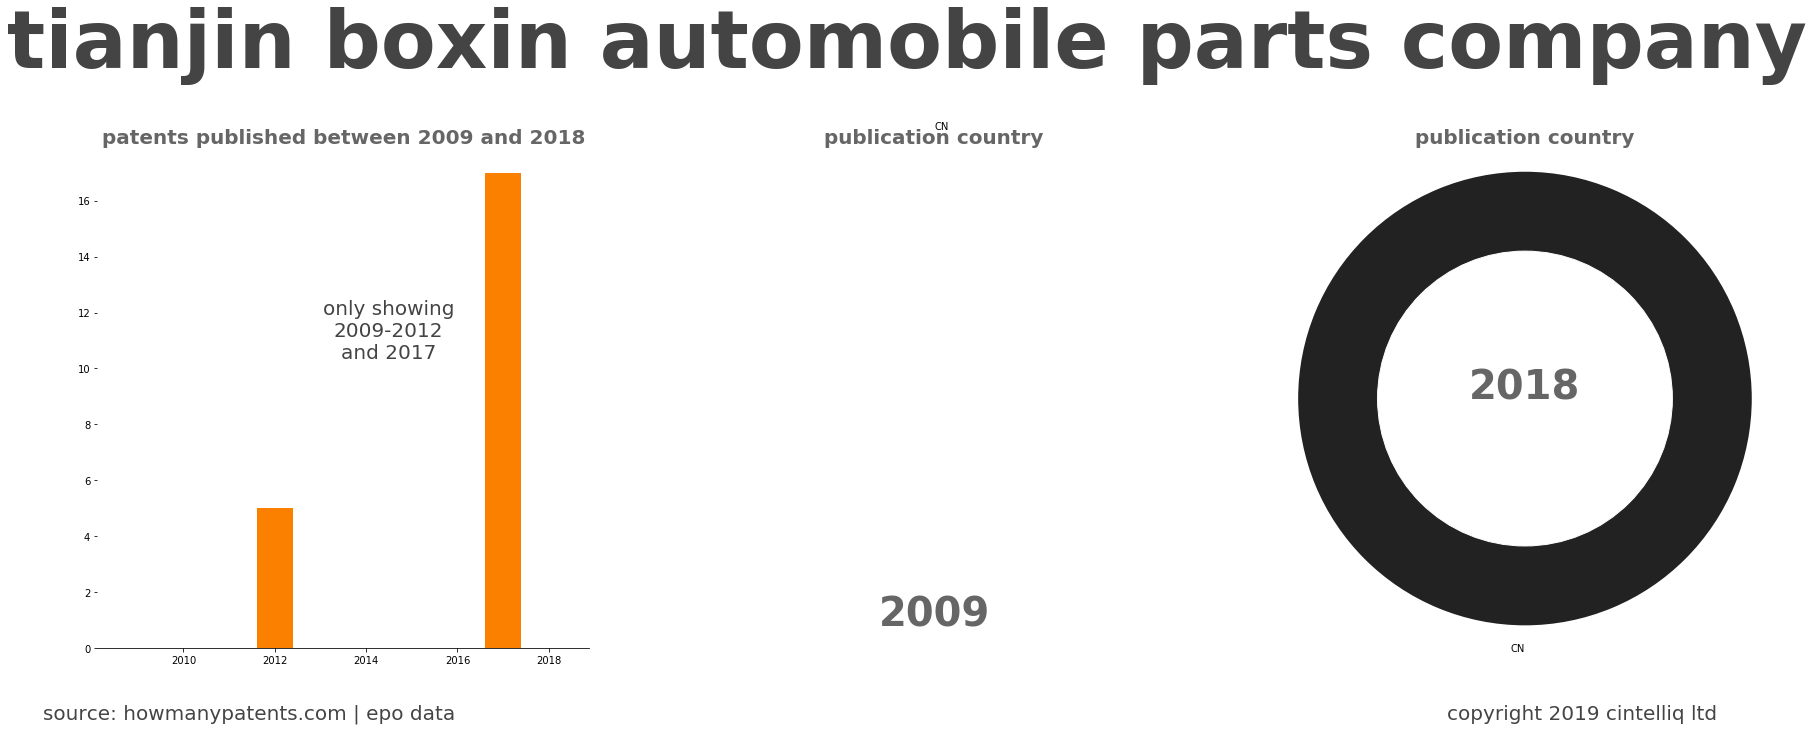 summary of patents for Tianjin Boxin Automobile Parts Company